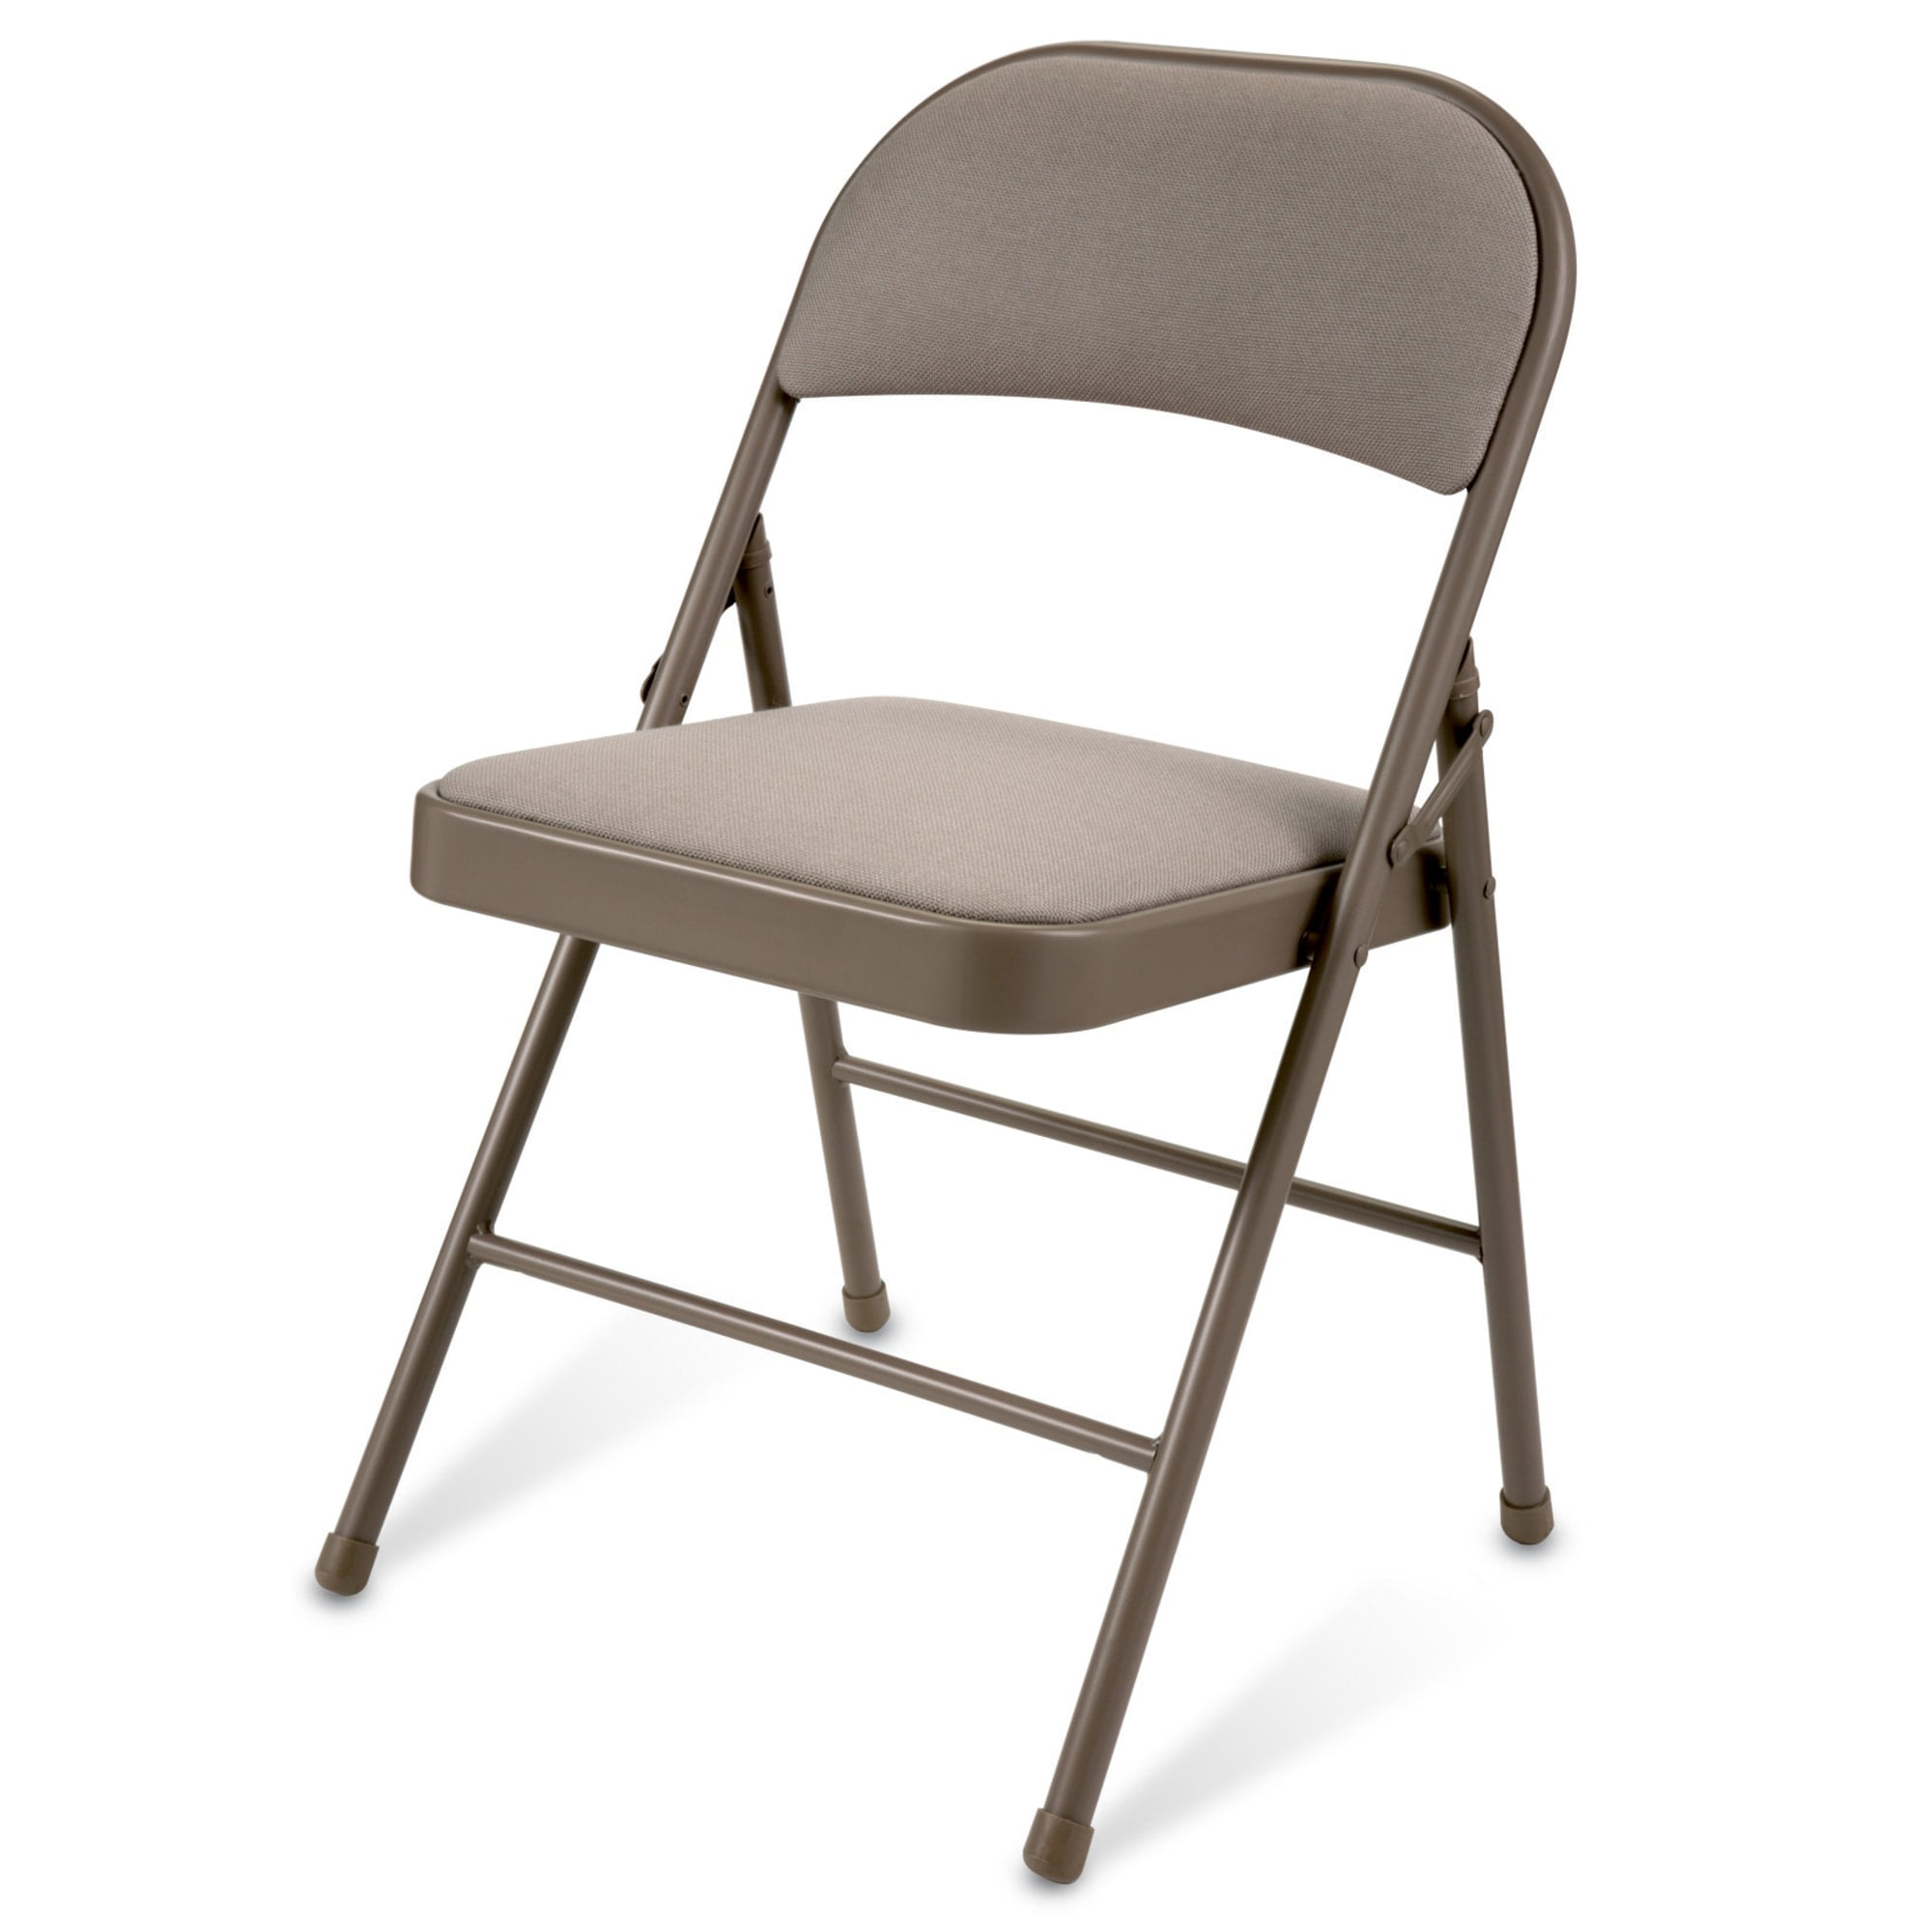  Realspace® Upholstered Padded Folding Chair, Gray : Home &  Kitchen